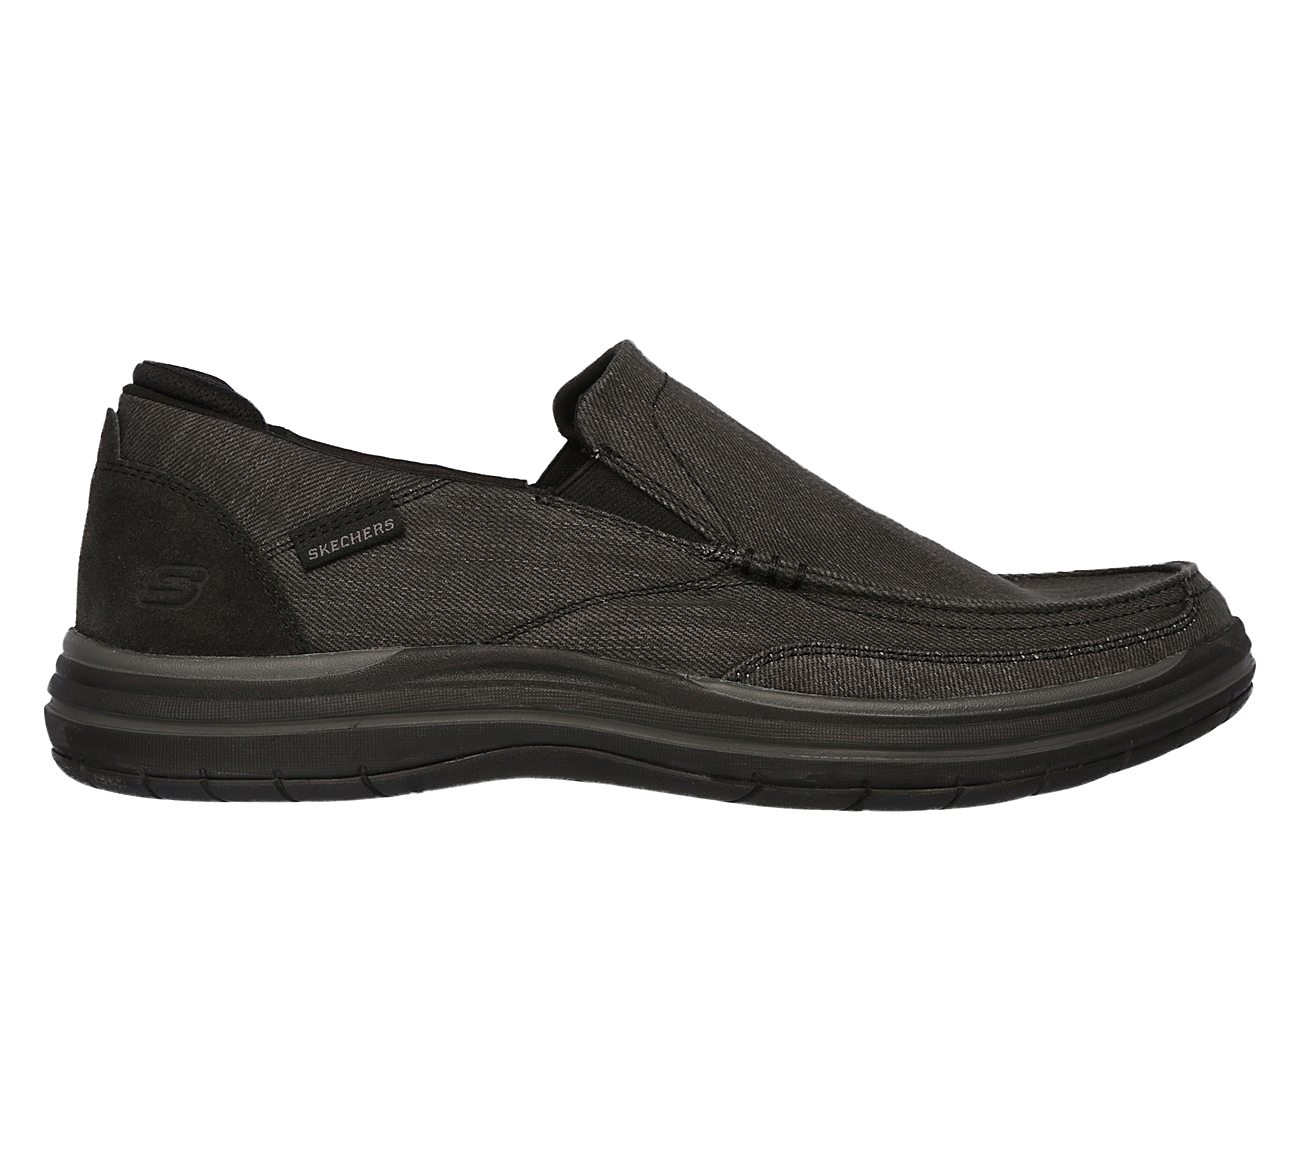 SKECHERS Elson - Amster USA Casuals Shoes